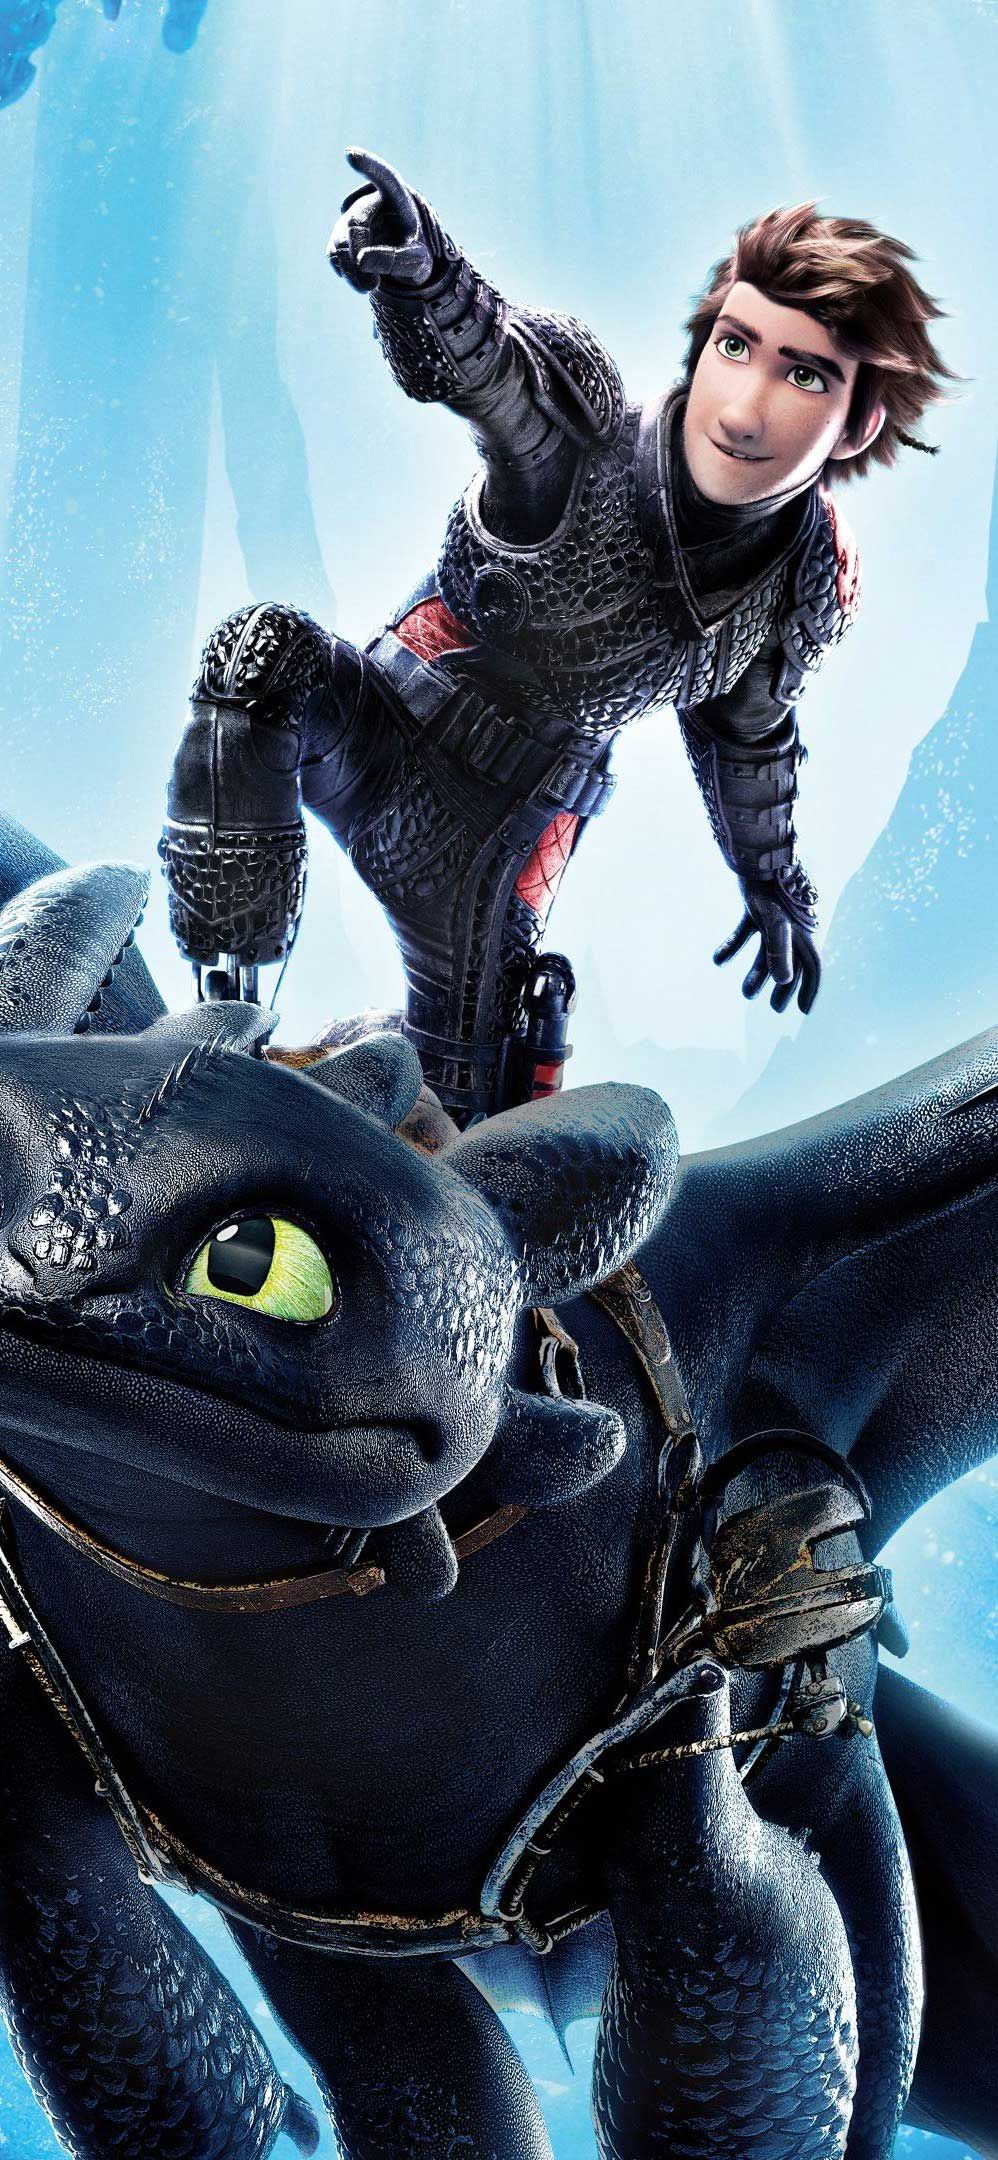 iPhone Wallpaper How To Train Your Dragon The Hidden World K wallpaper HD. How train your dragon, How to train your dragon, How to train dragon